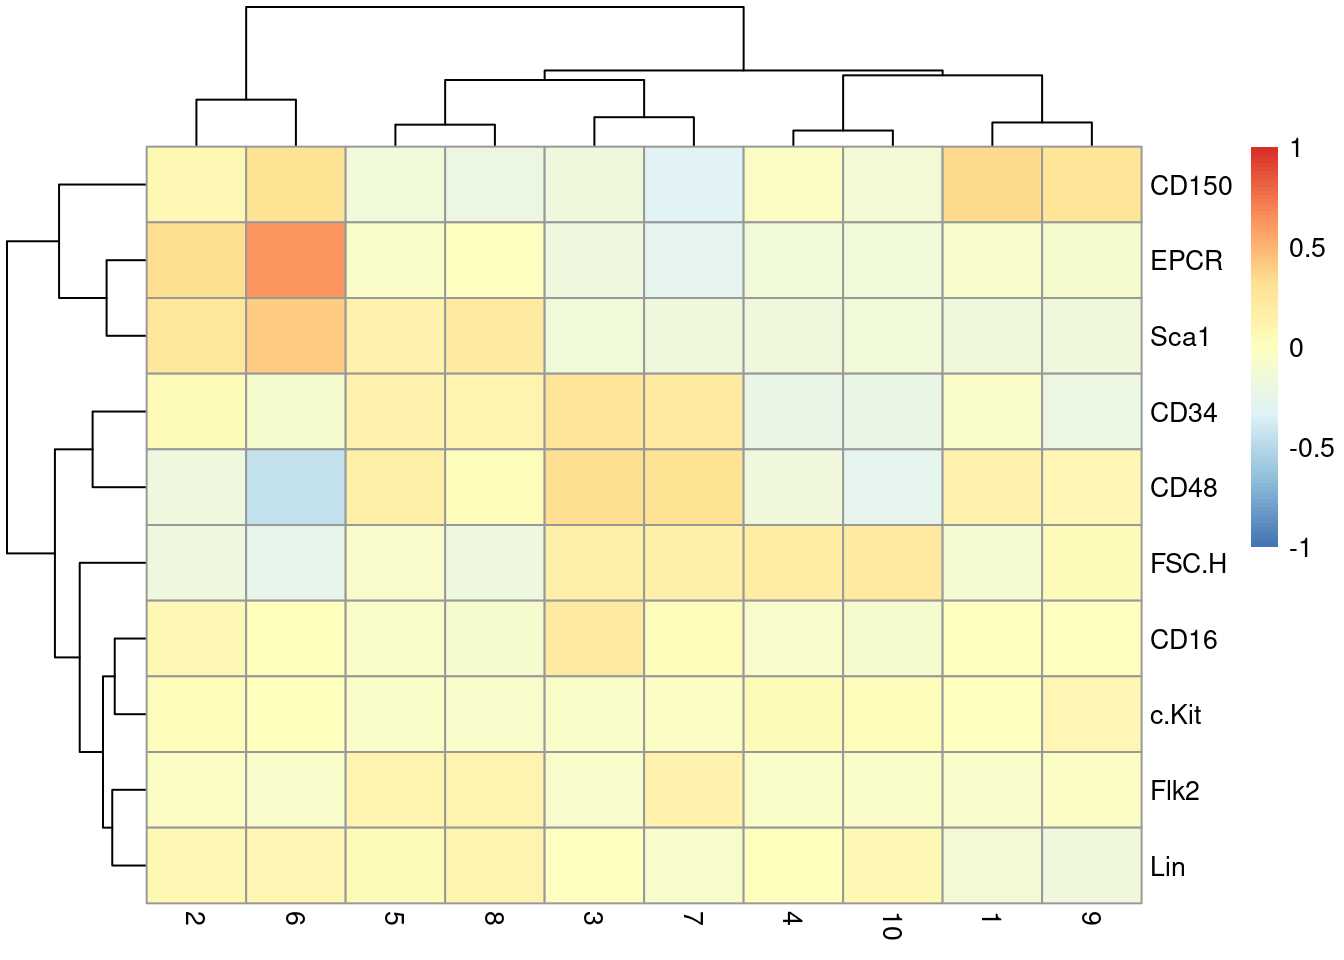 Heatmap of the centered log-average intensity for each target protein quantified by FACS in the Nestorowa HSC dataset.